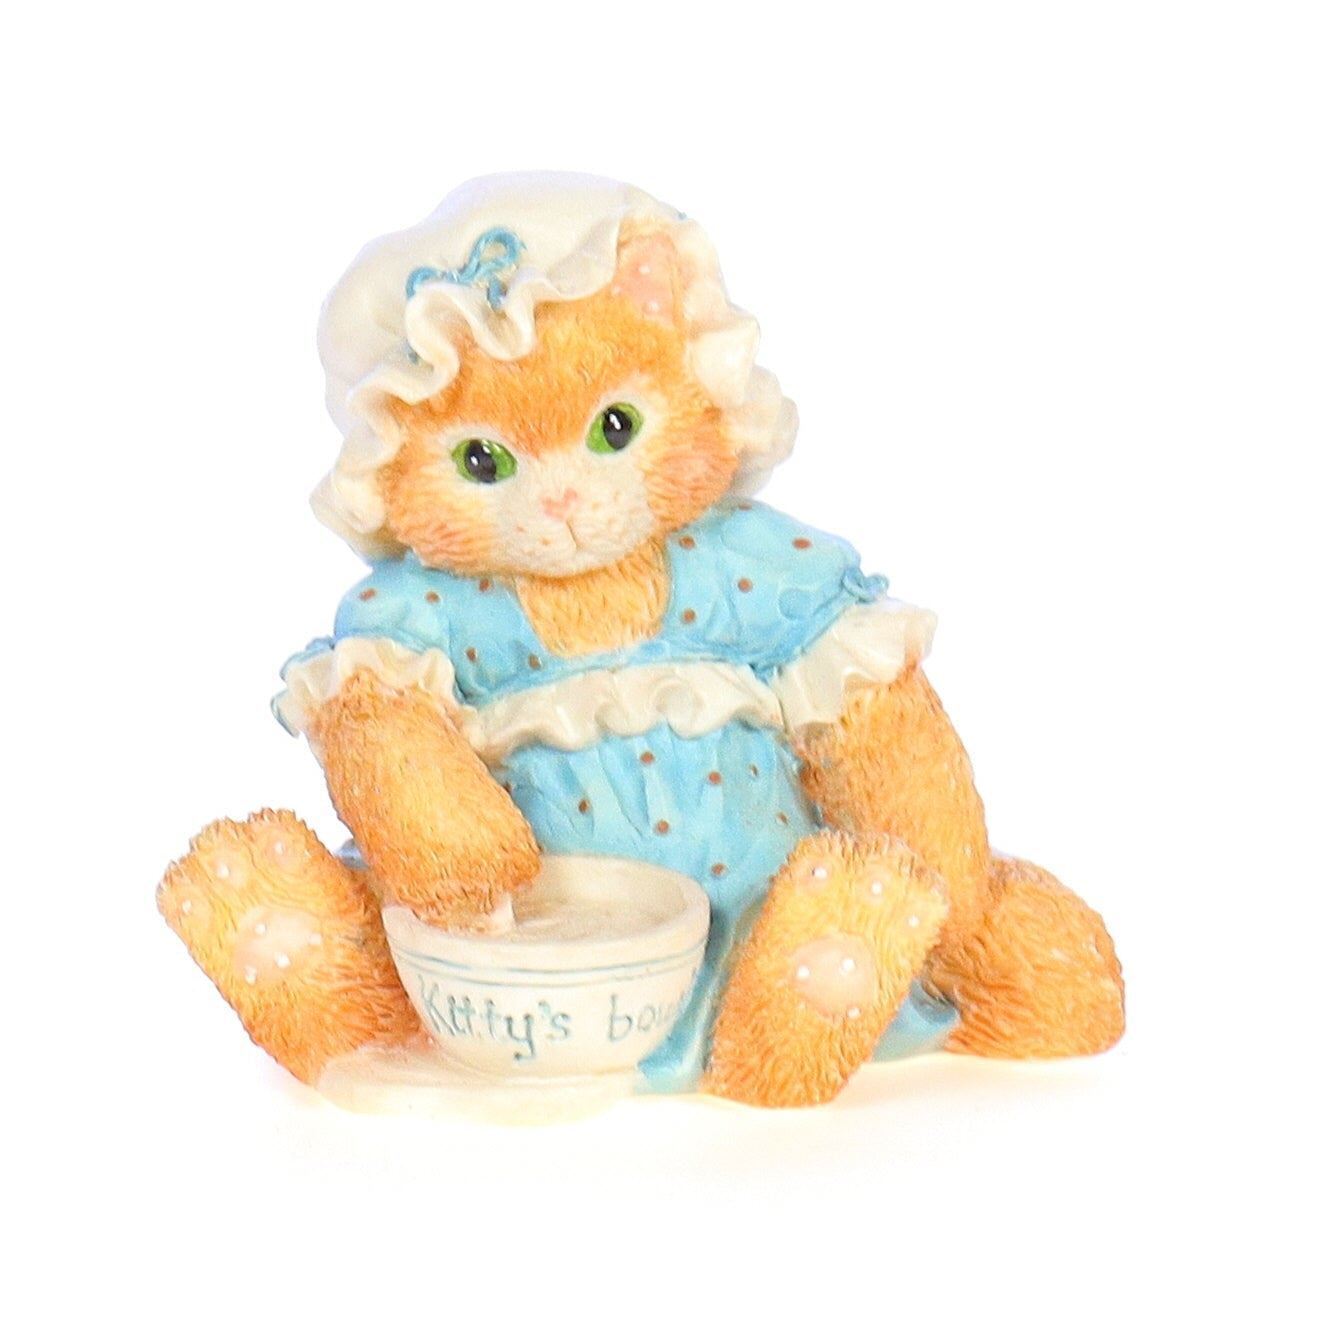 Calico Kittens Vintage 1994 Resin Figurine Finicky An Unexpected Treat 112321